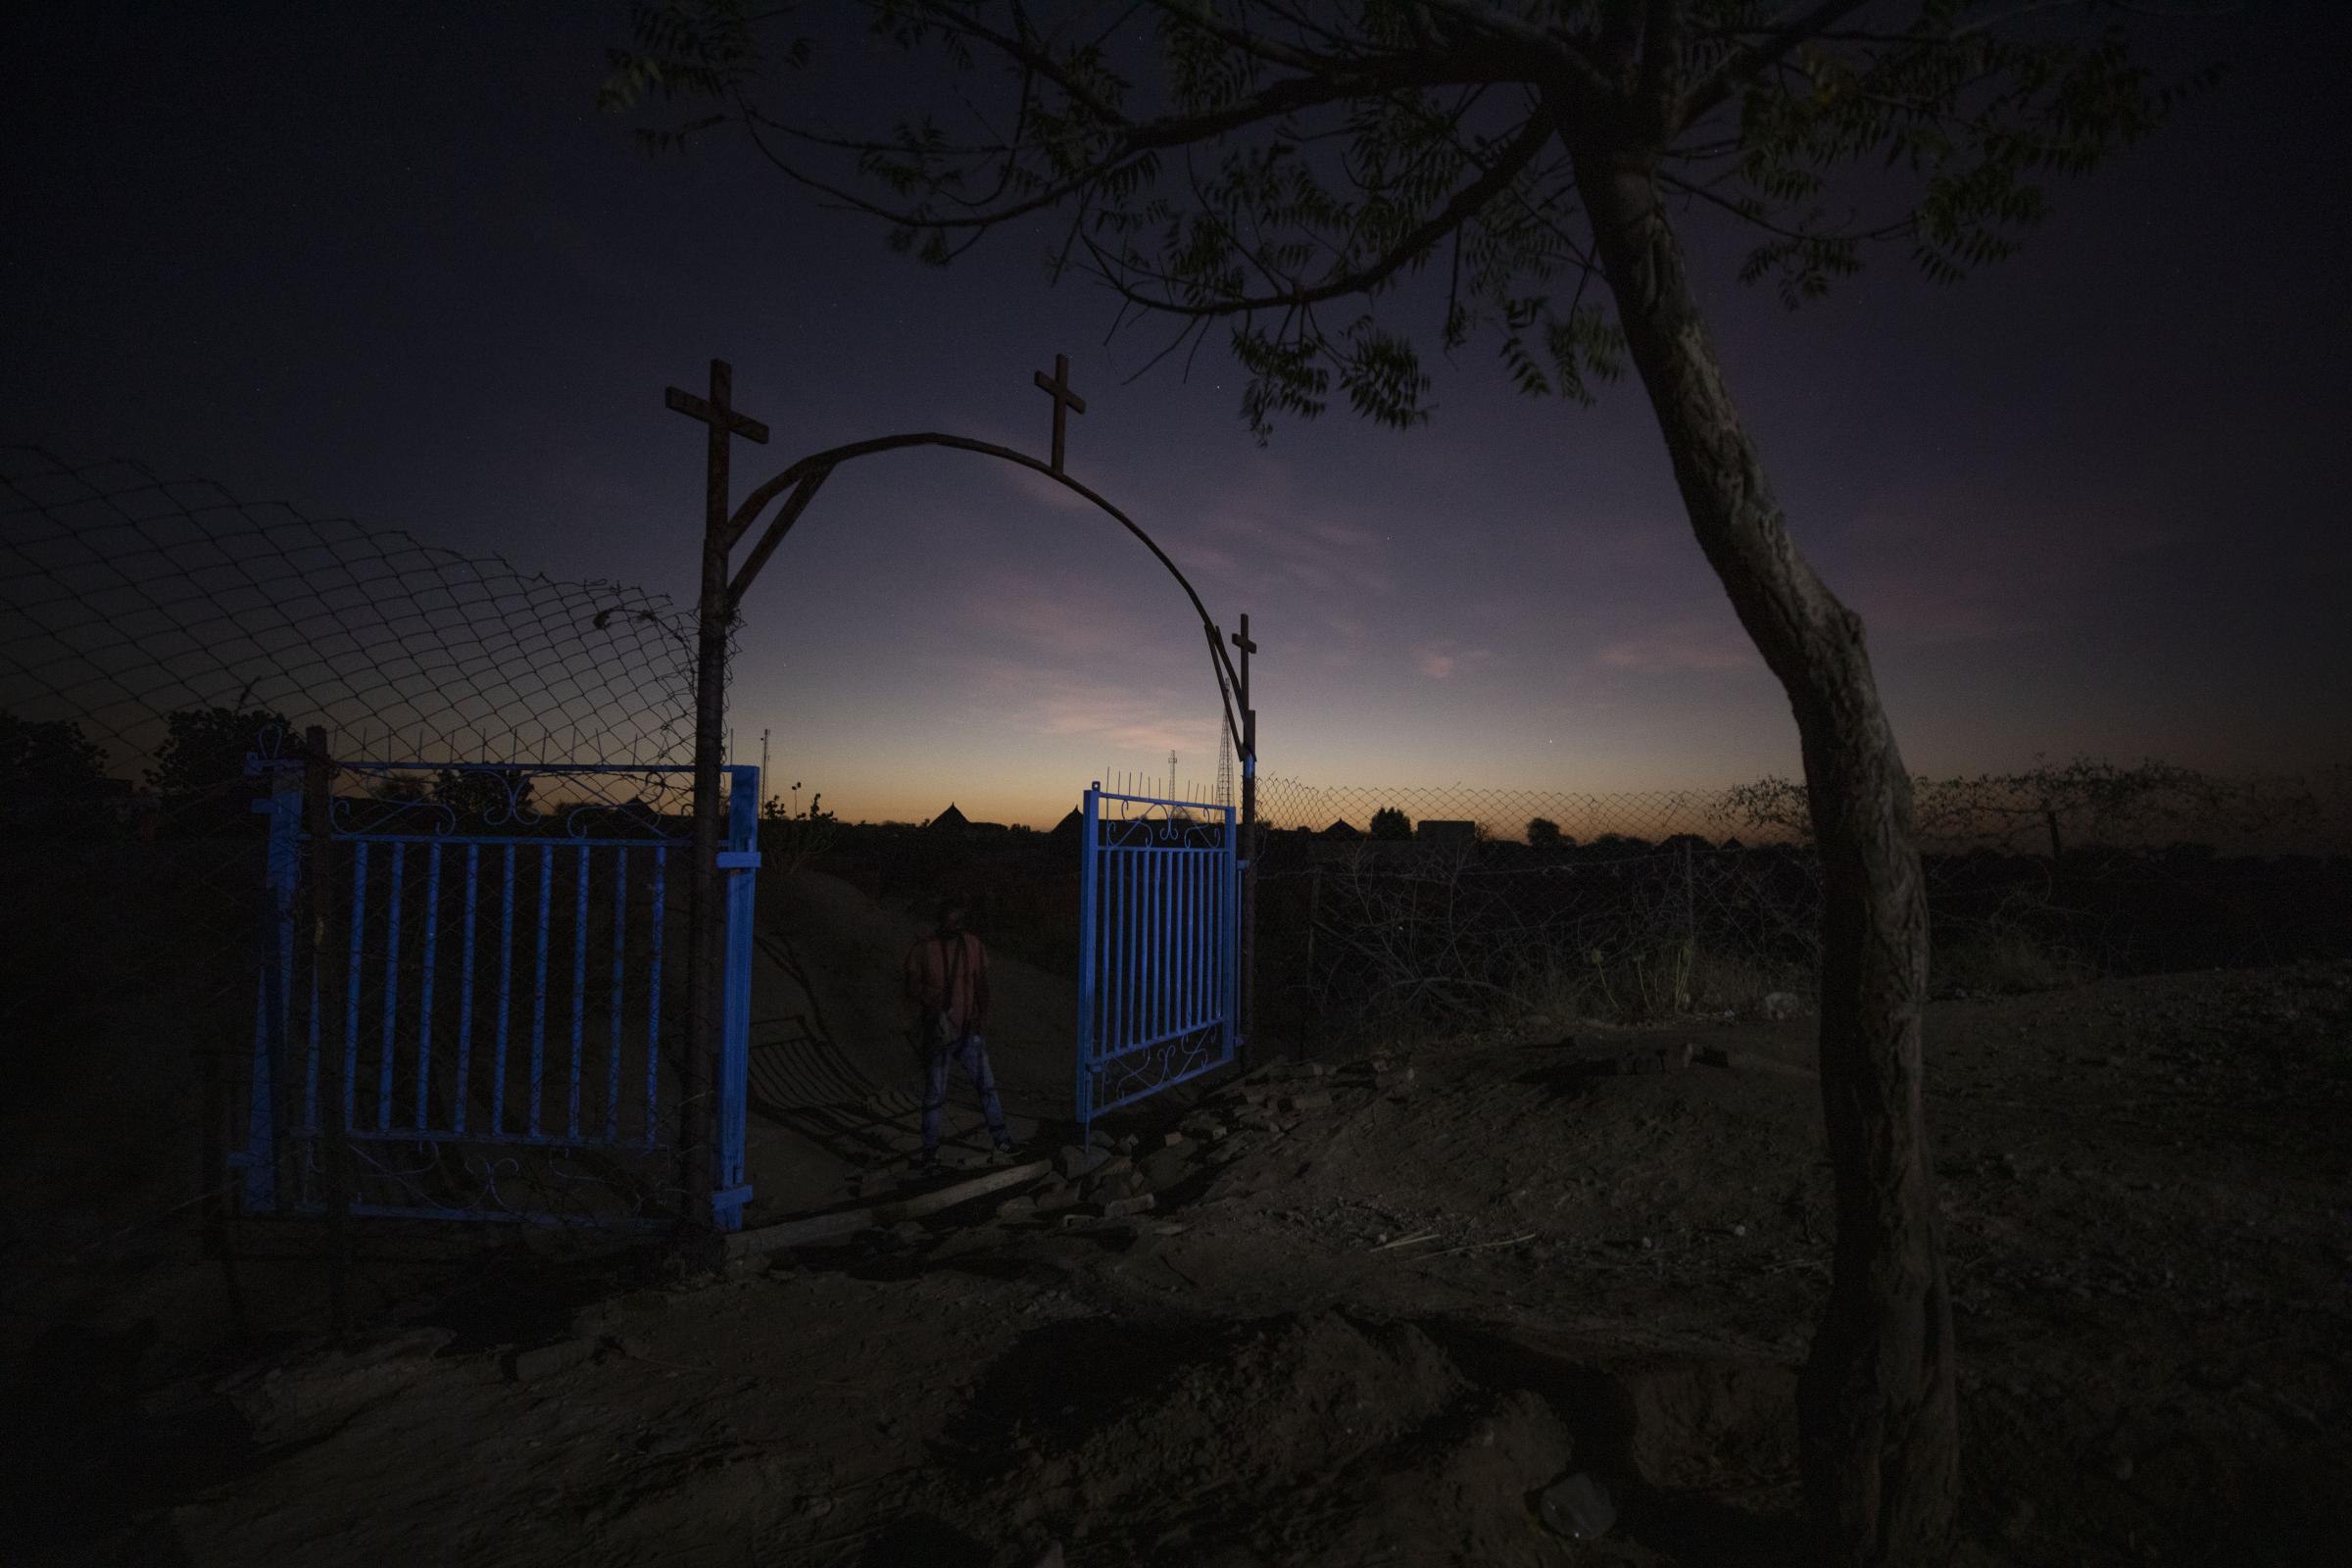 Tigray babies born in bloodshed  -  The gate to a church in Hamdayet. 